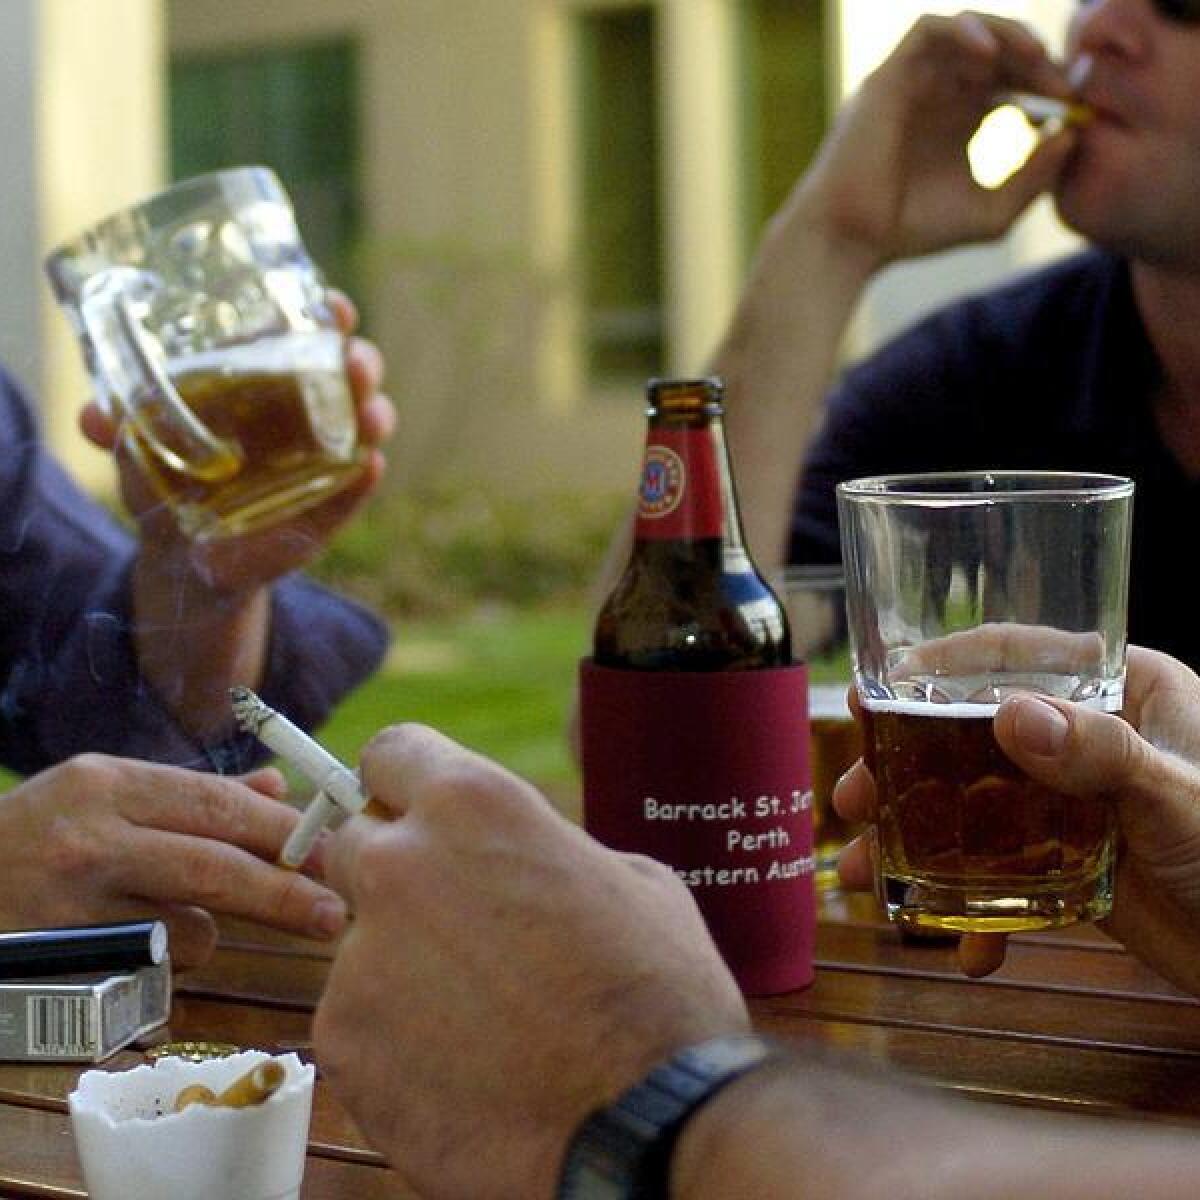 Smoking and drinking contributed to almost half of 2019 cancer deaths.